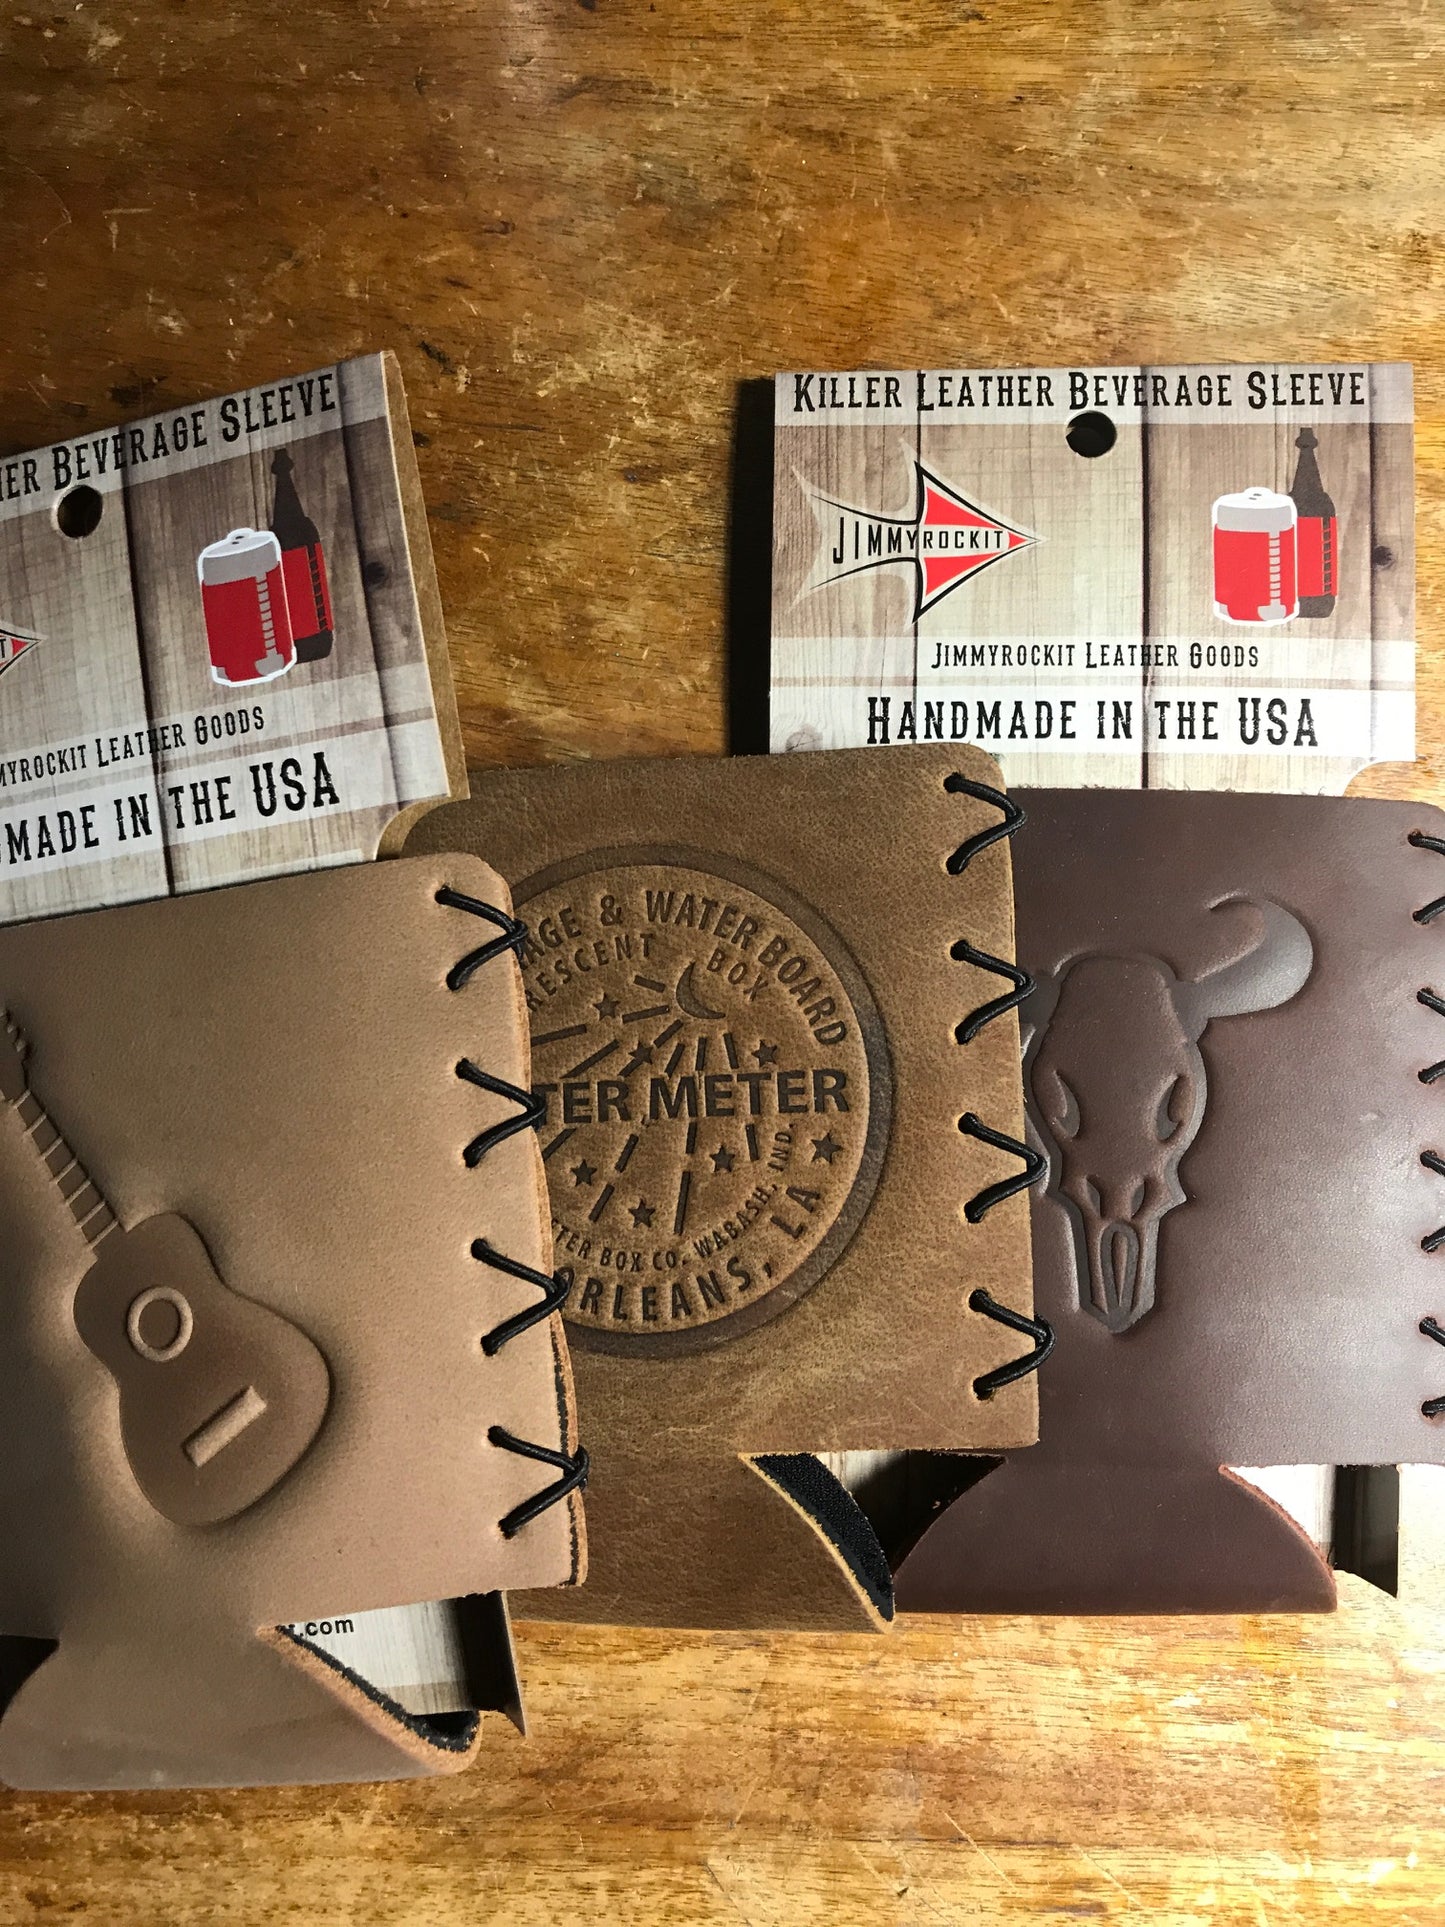 Leather Koozie - Employee of the Month Runner-Up